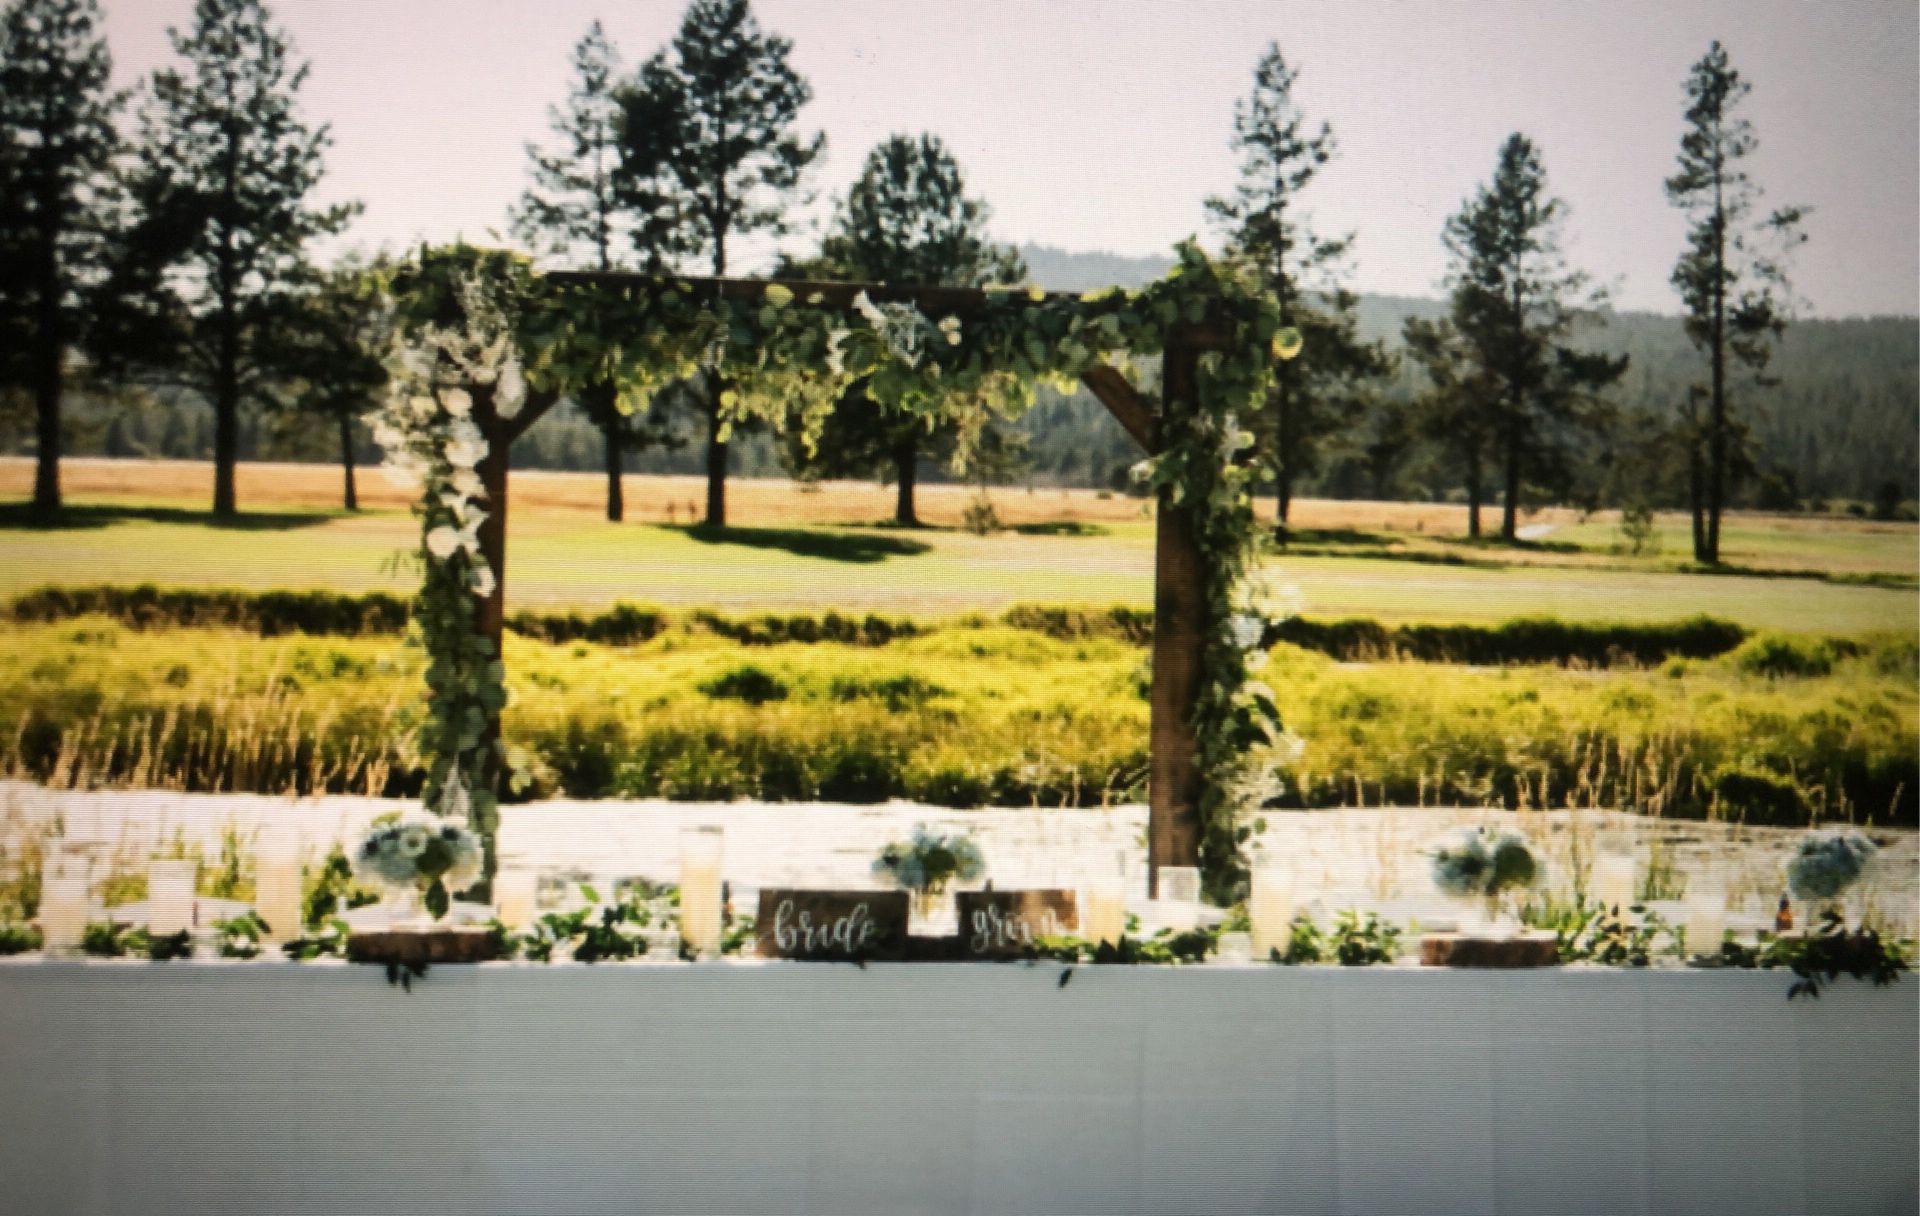 Arbor Rustic Wood For wedding/Events